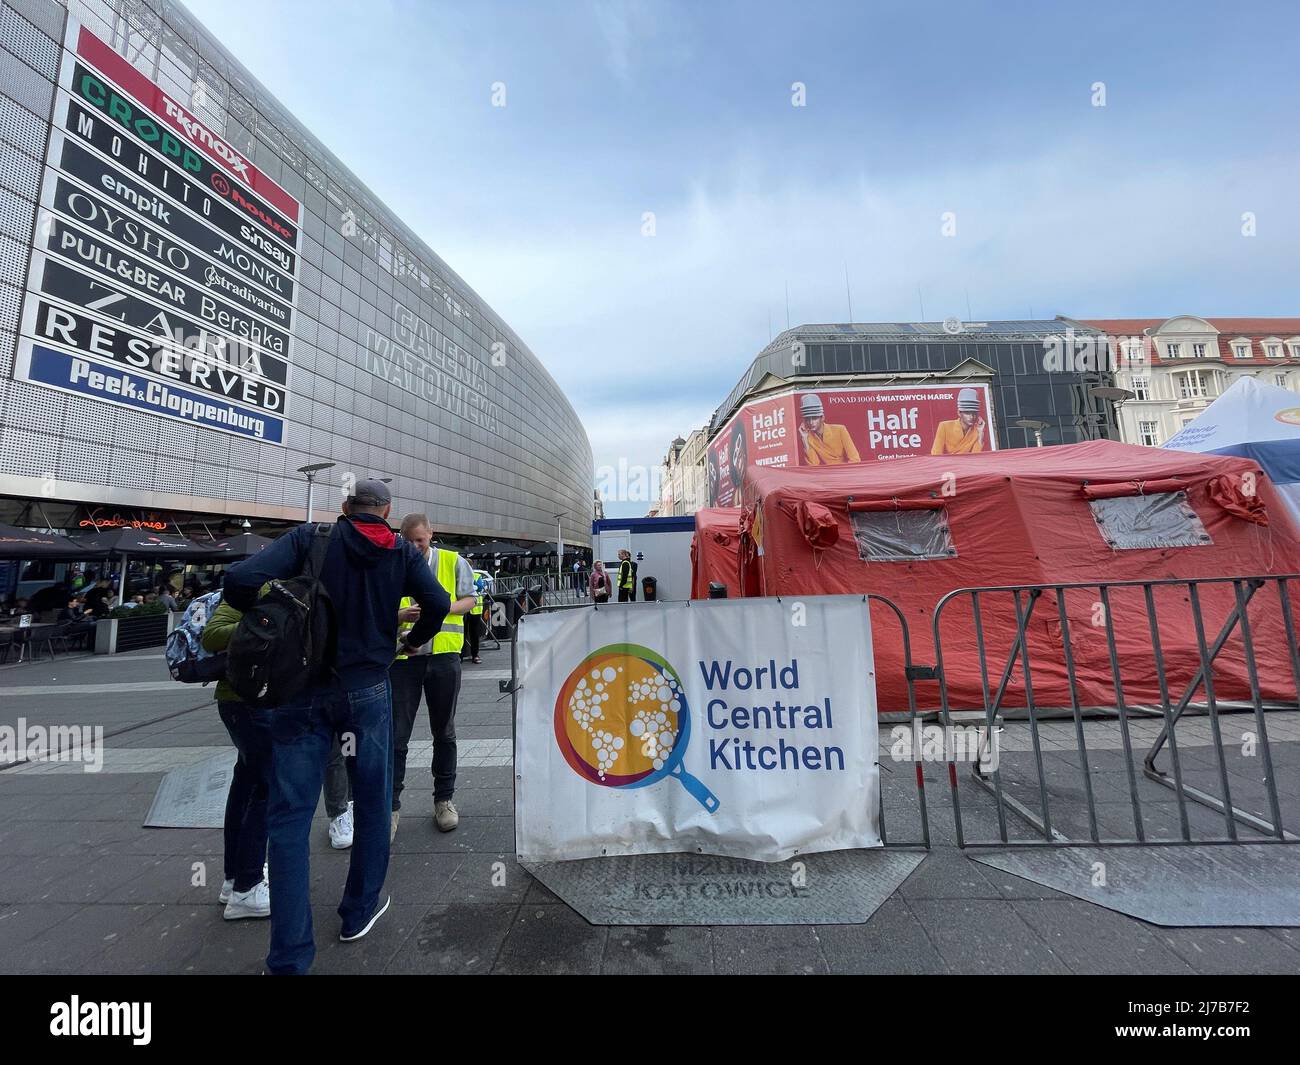 May 7, 2022, Katowica, Poland: Ukrainian refugees talks to a yellow vested  security volunteer in front of World Central Kitchen Tent, outside the  Katowice train station, which a music video plays on